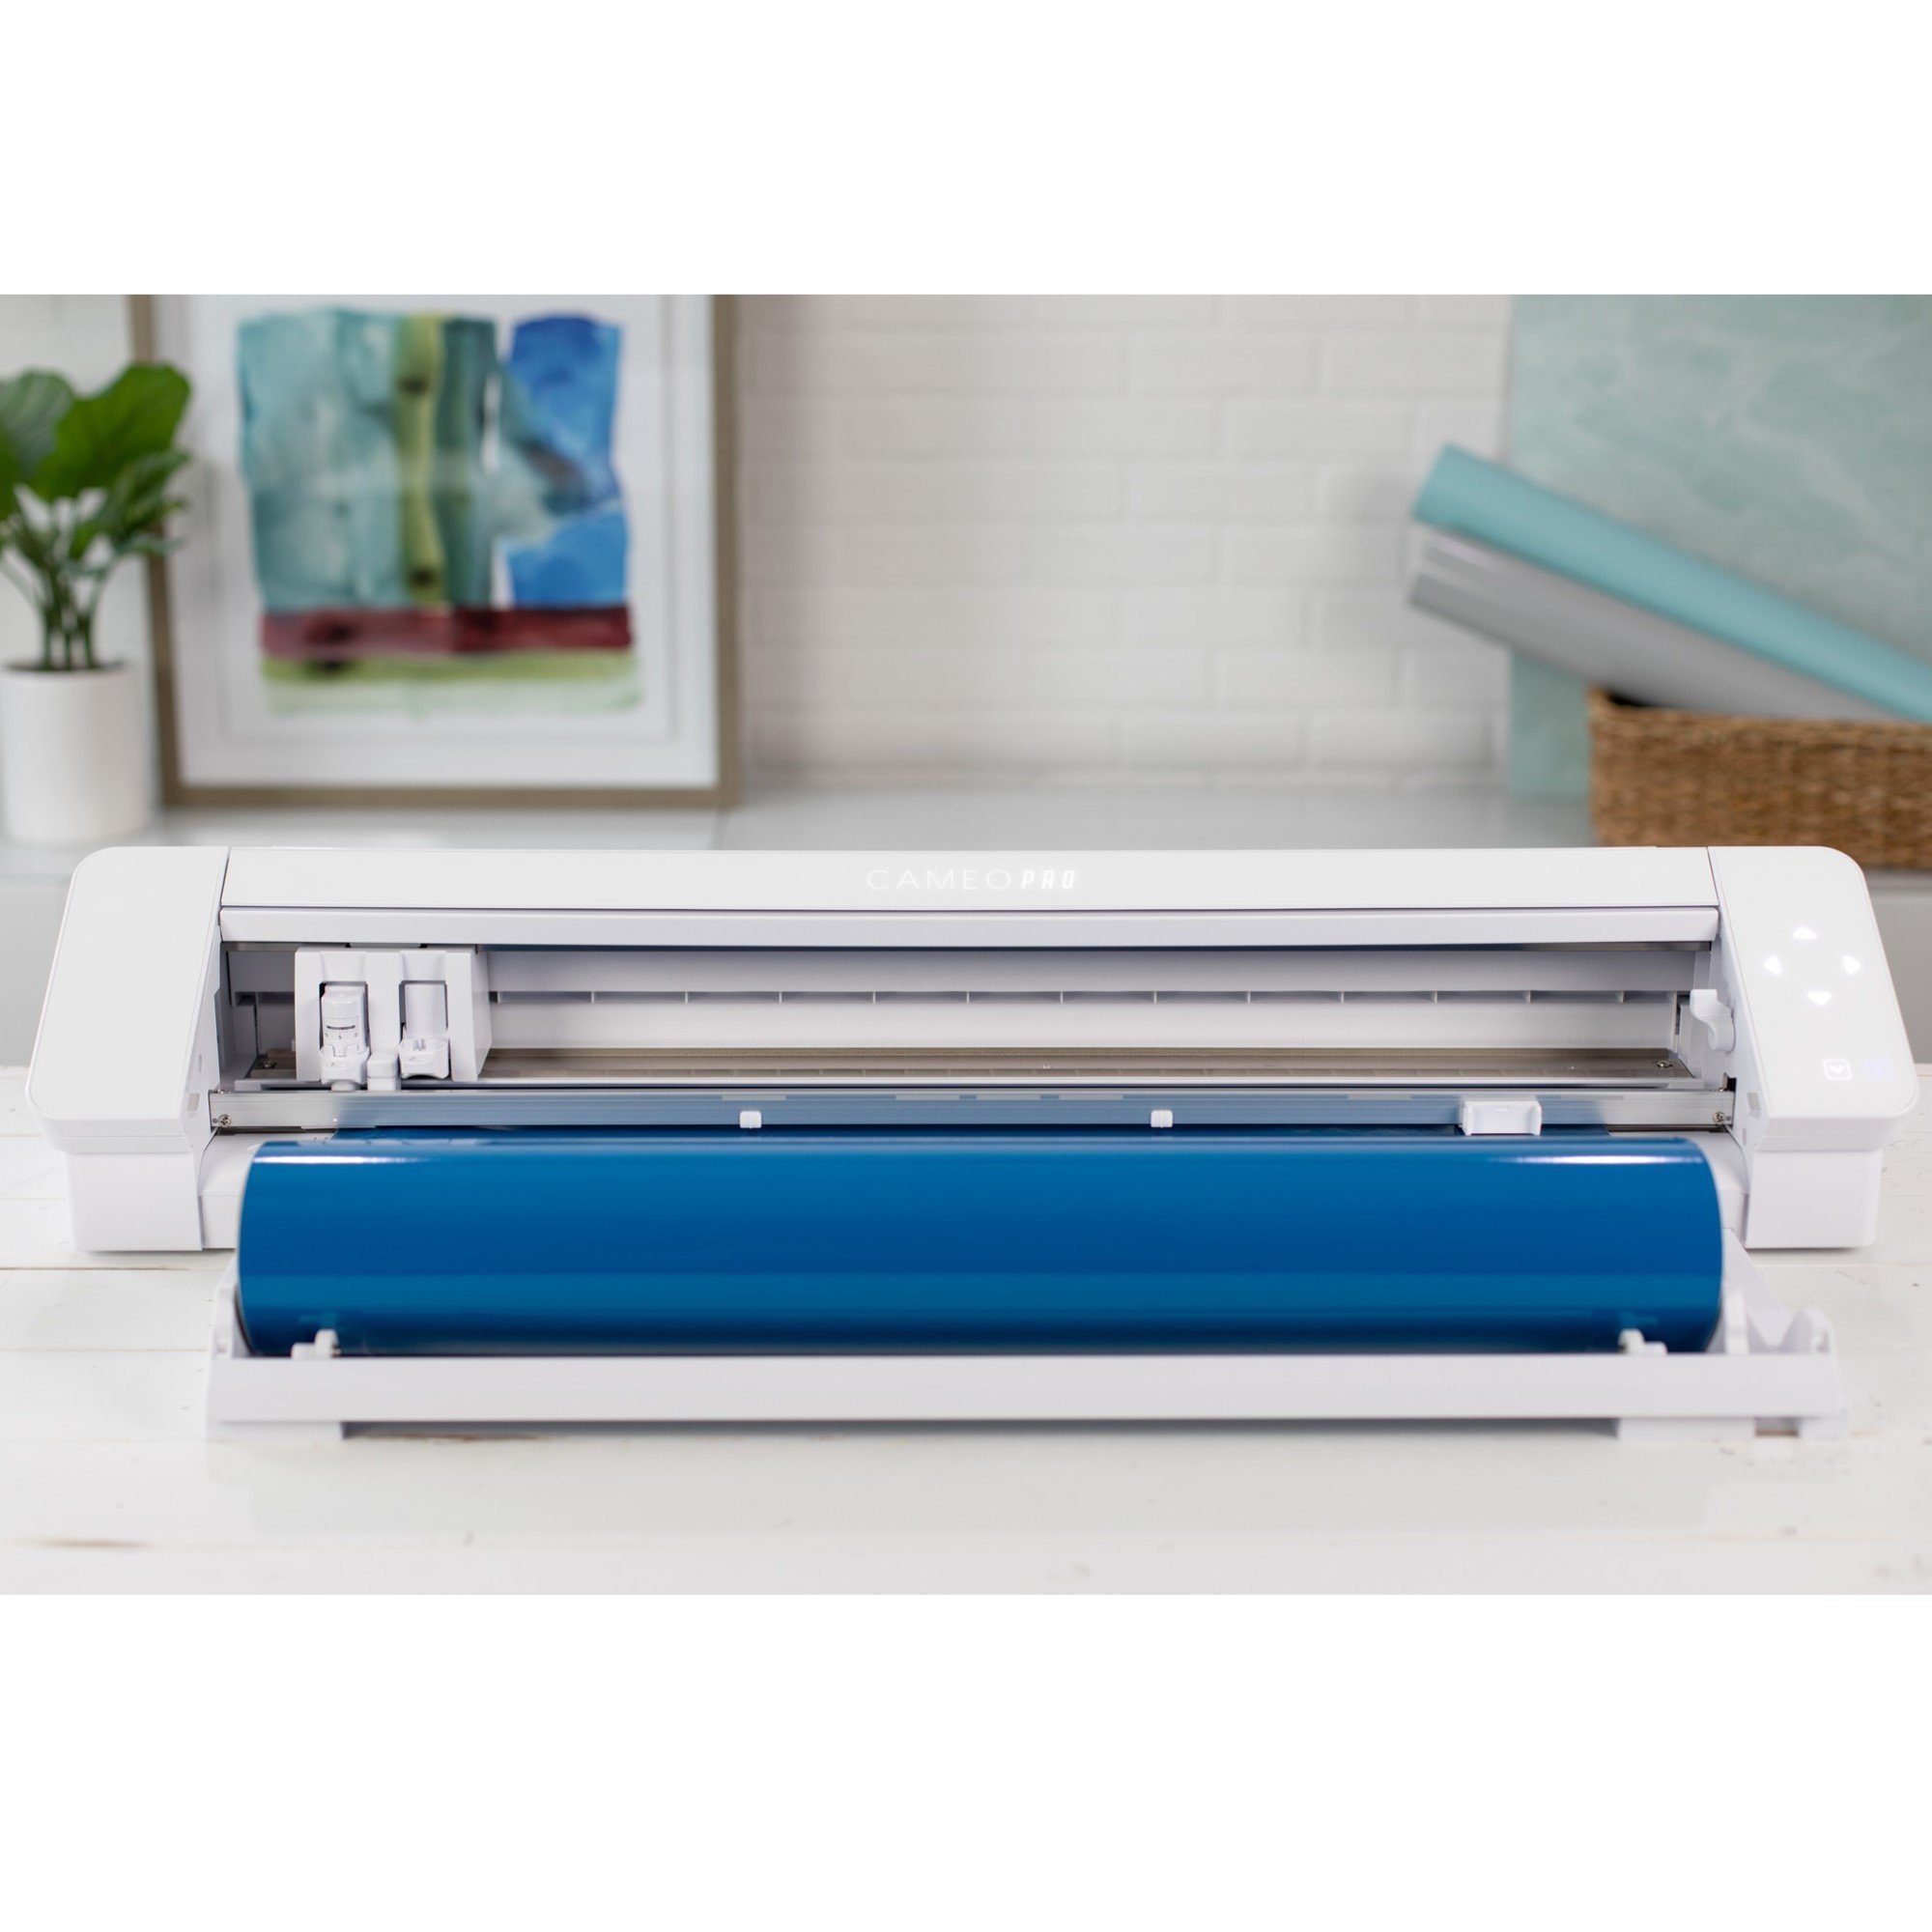 Silhouette Cameo 4 Pro - 24 w/ Oracal 651 24 Wide Vinyl Rolls, Tools, Guides